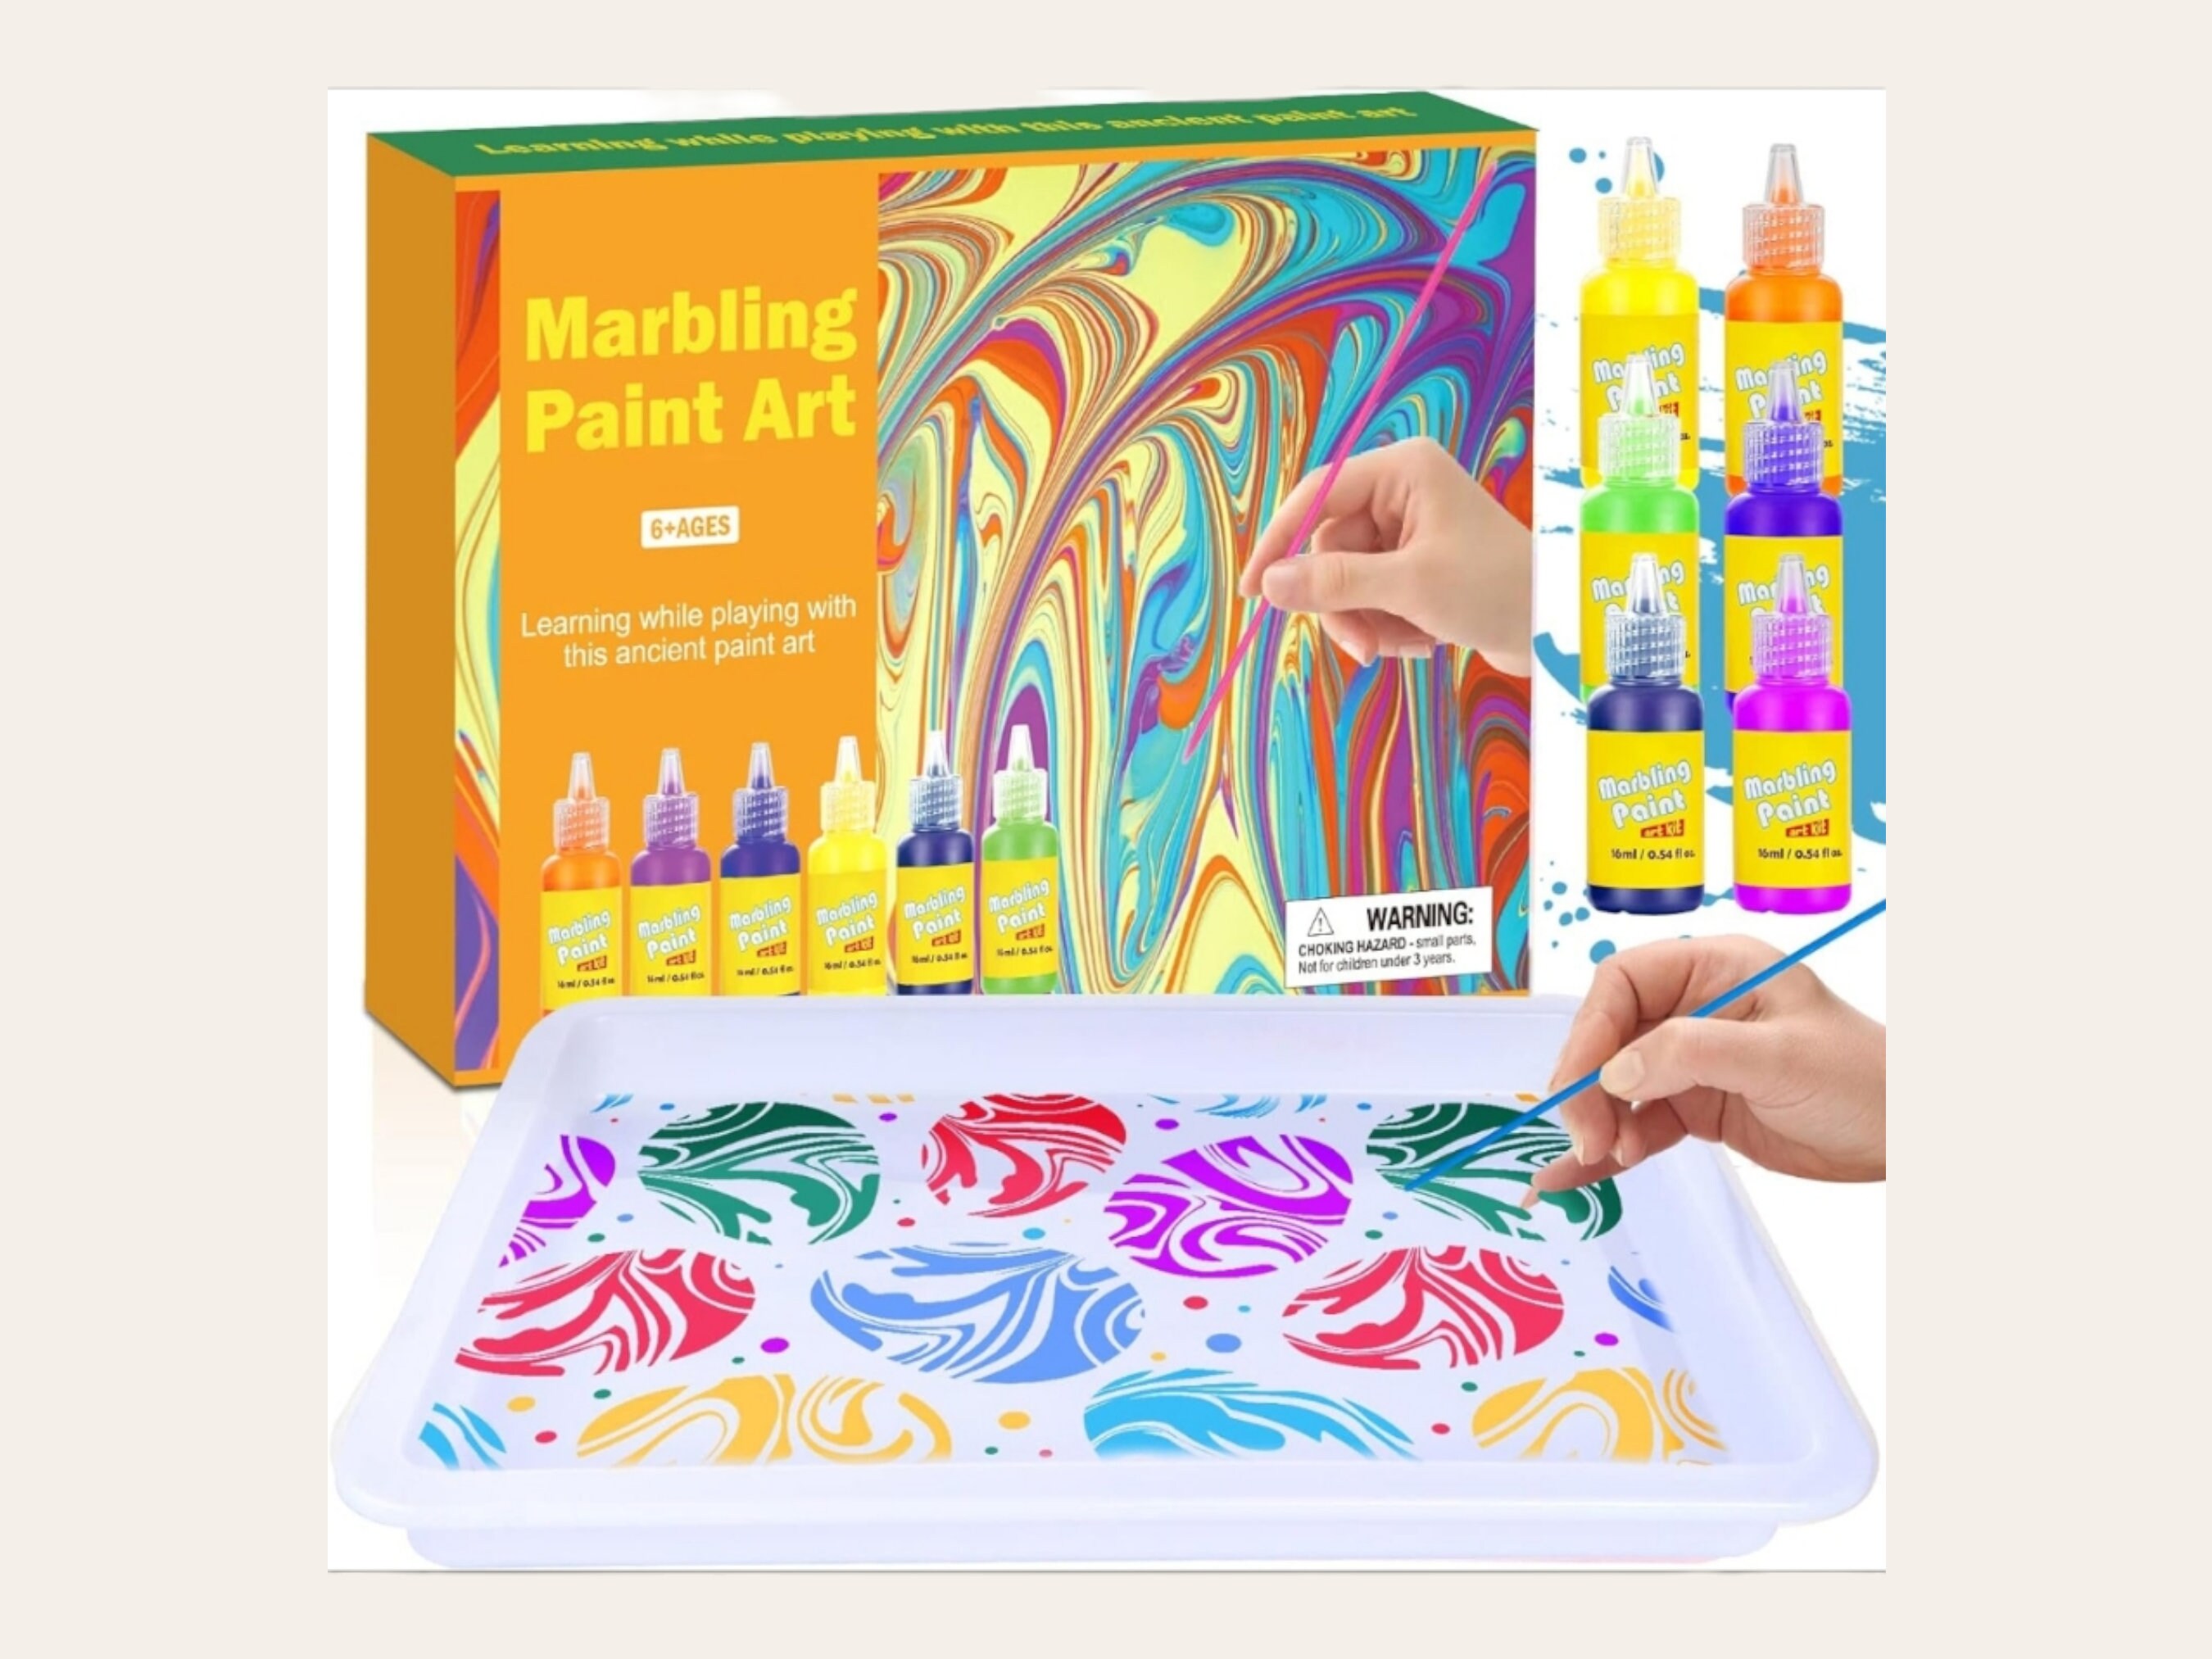 Creative Marbling Paint Kit Unique Water Art Craft Set for Kids Ages 6-12  Ideal Gifts for Creative Kids Activities 